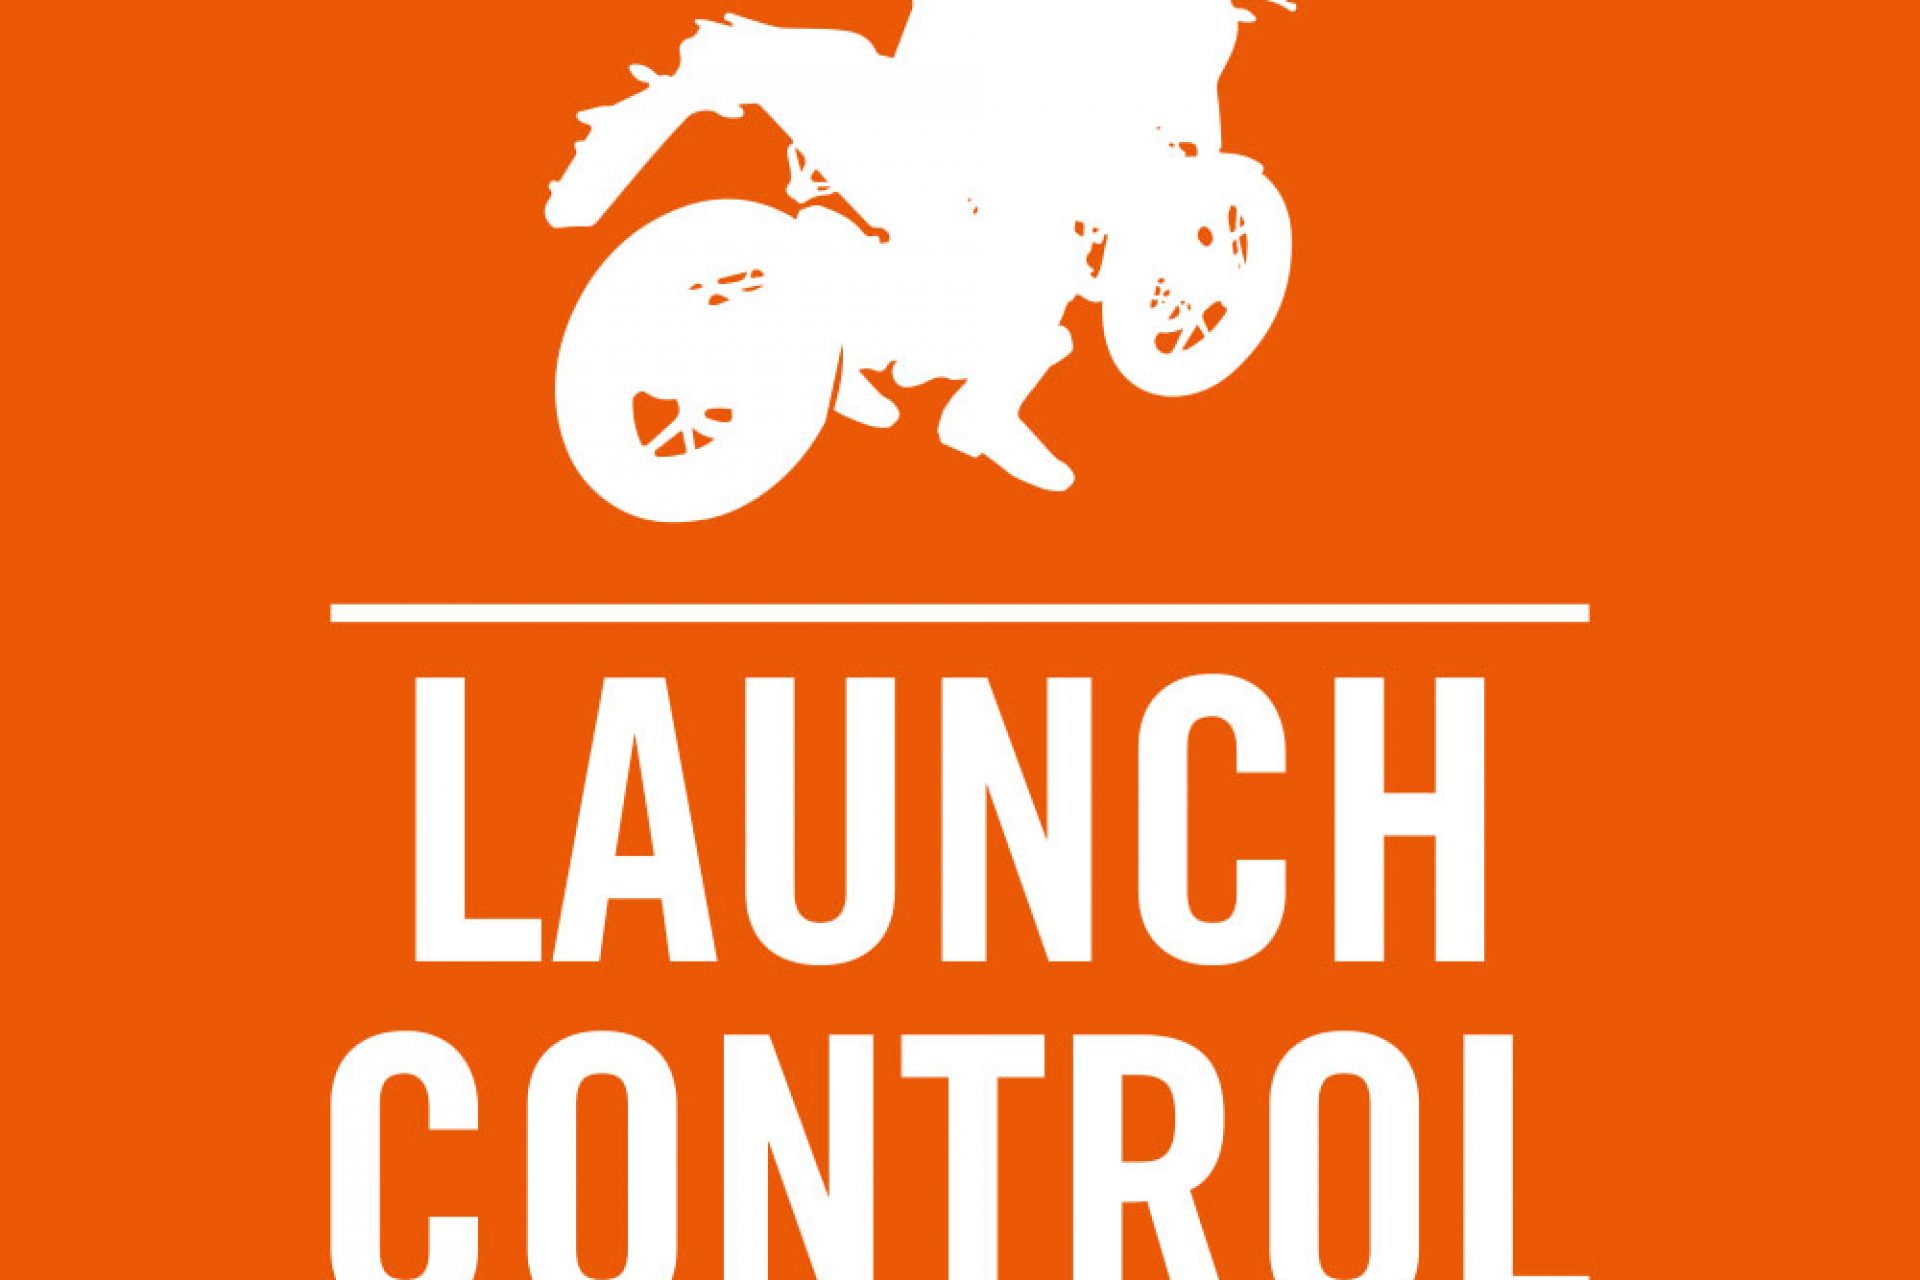 LAUNCH CONTROL